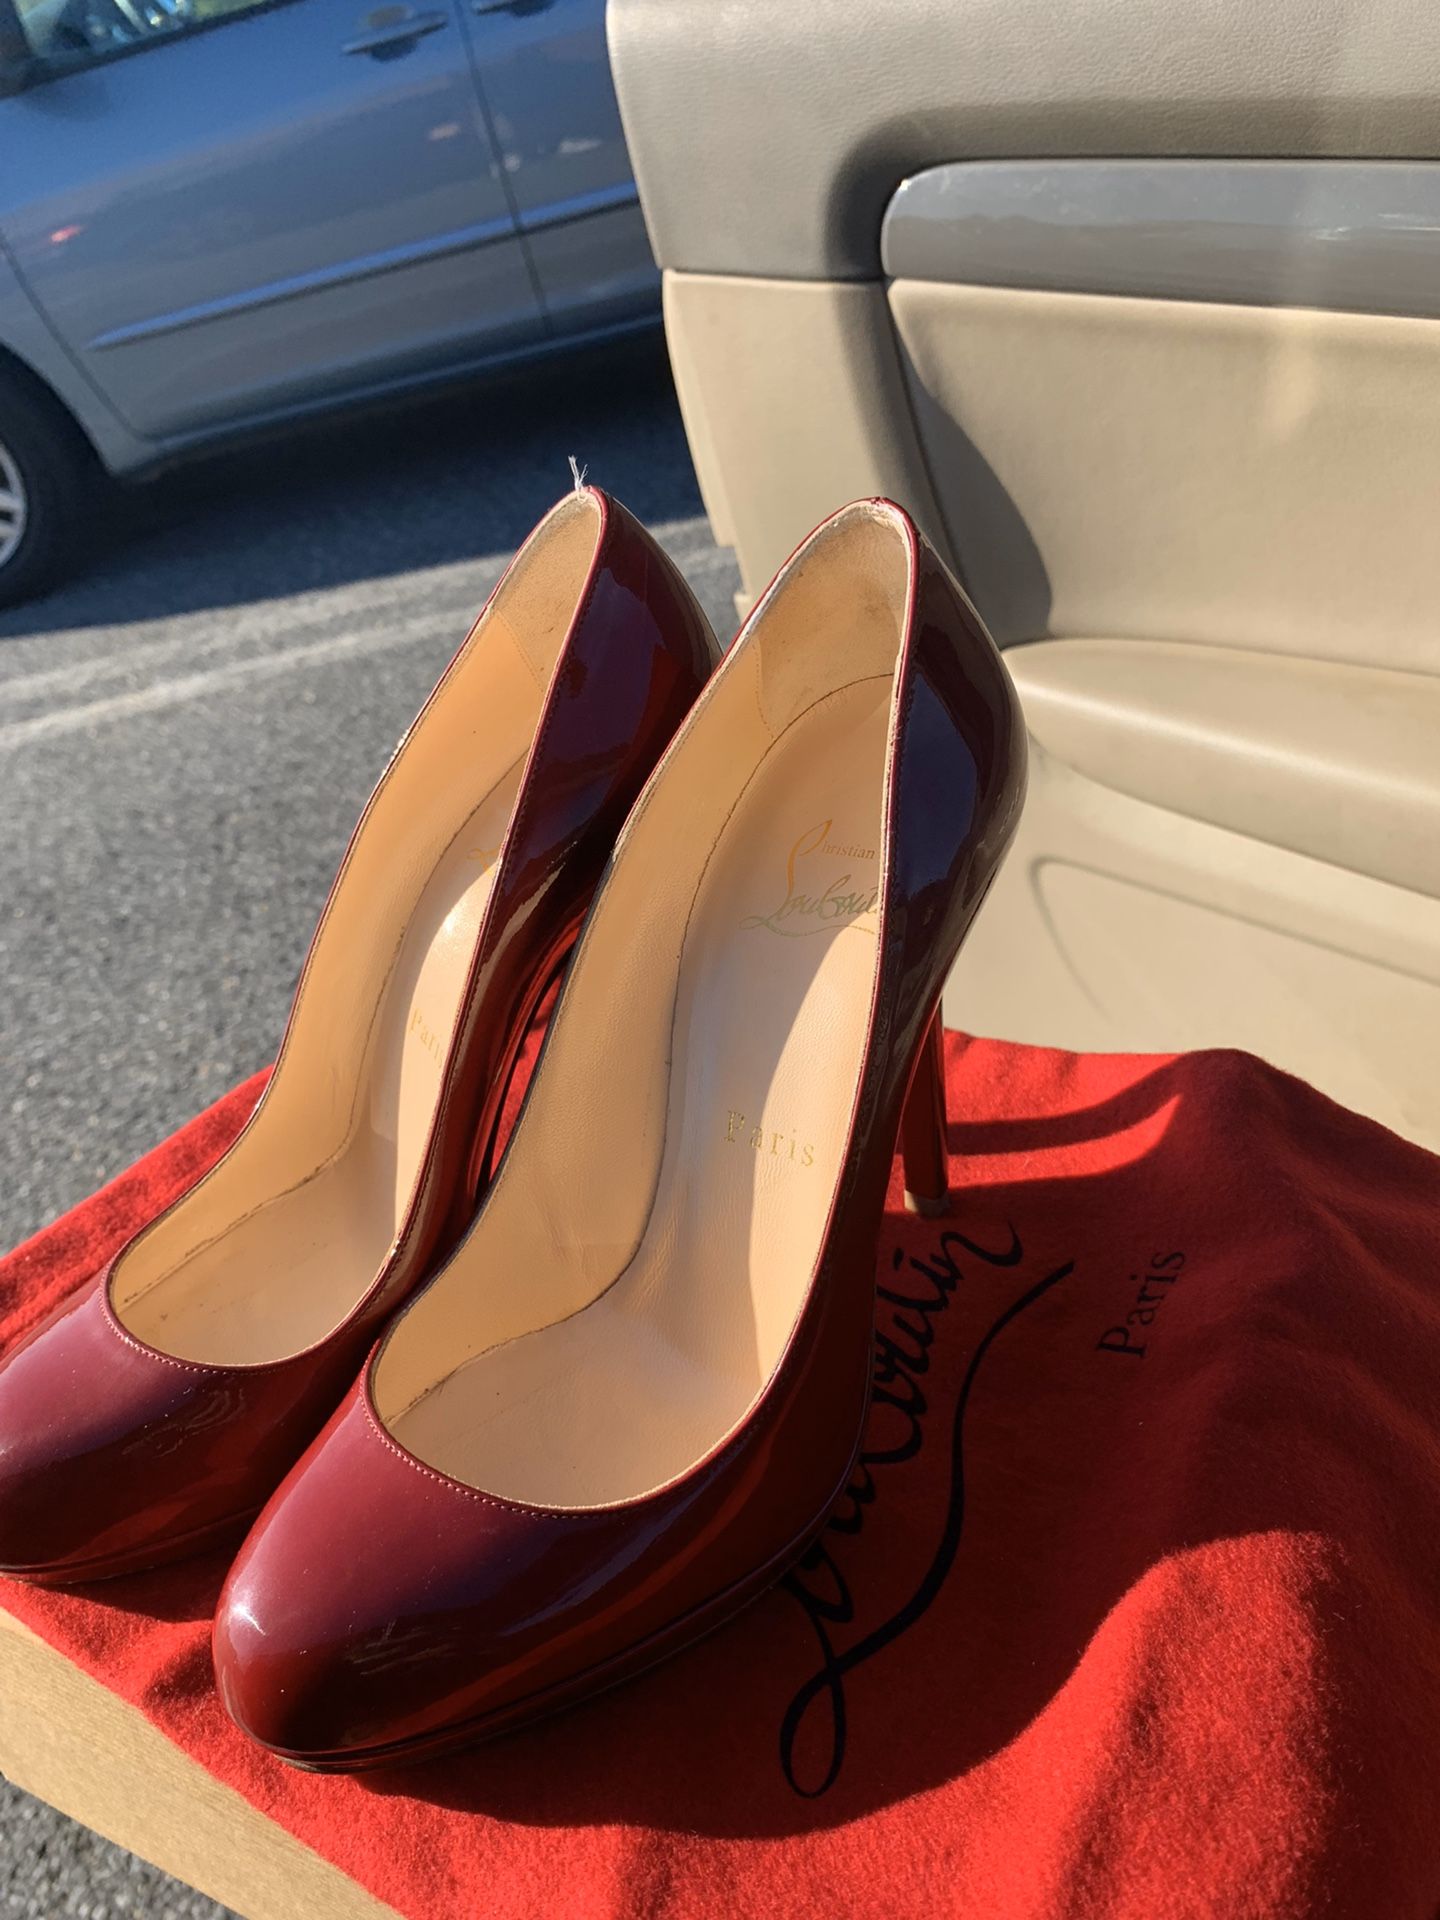 christian louboutin neofilo 120 patent rouge heels (red bottoms)